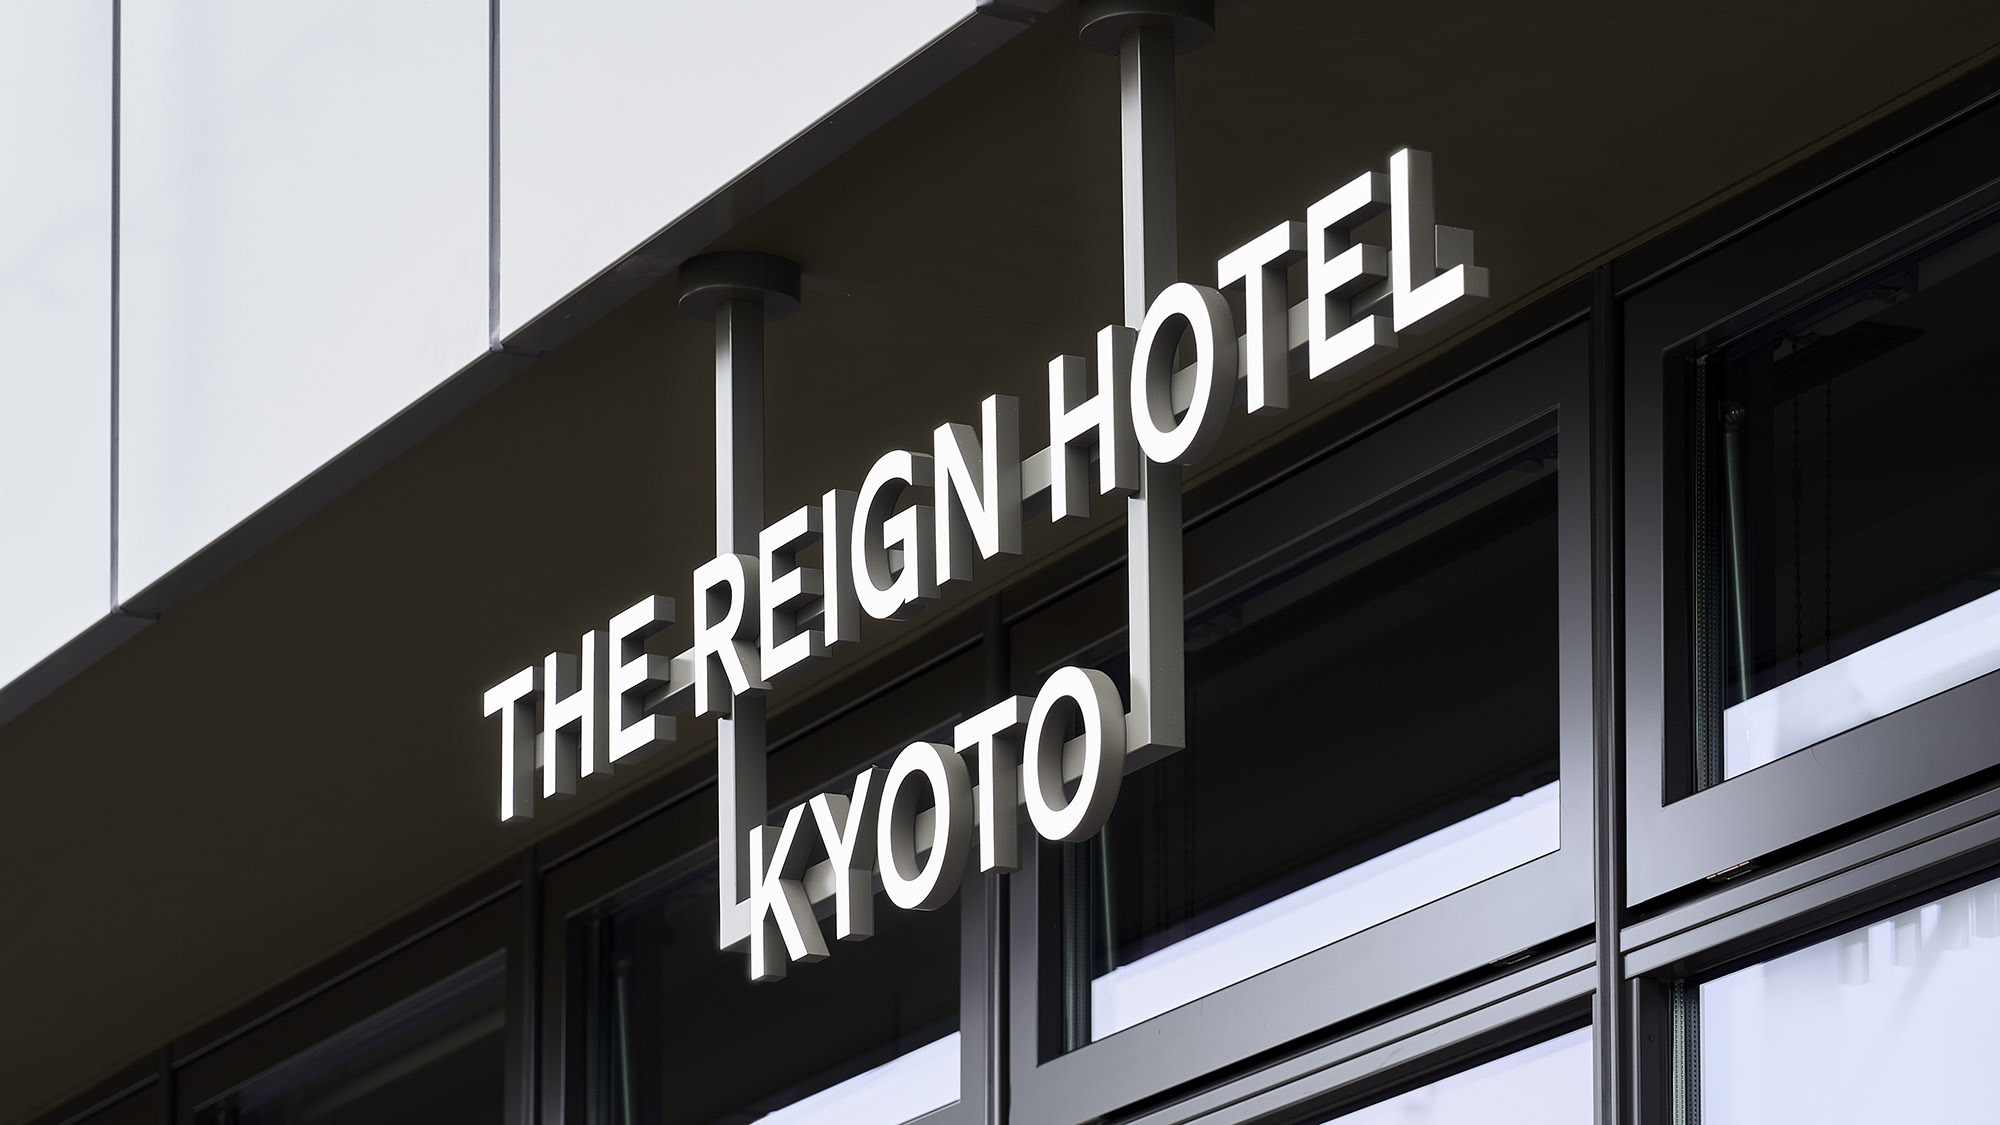 THE REIGN HOTEL KYOTO image